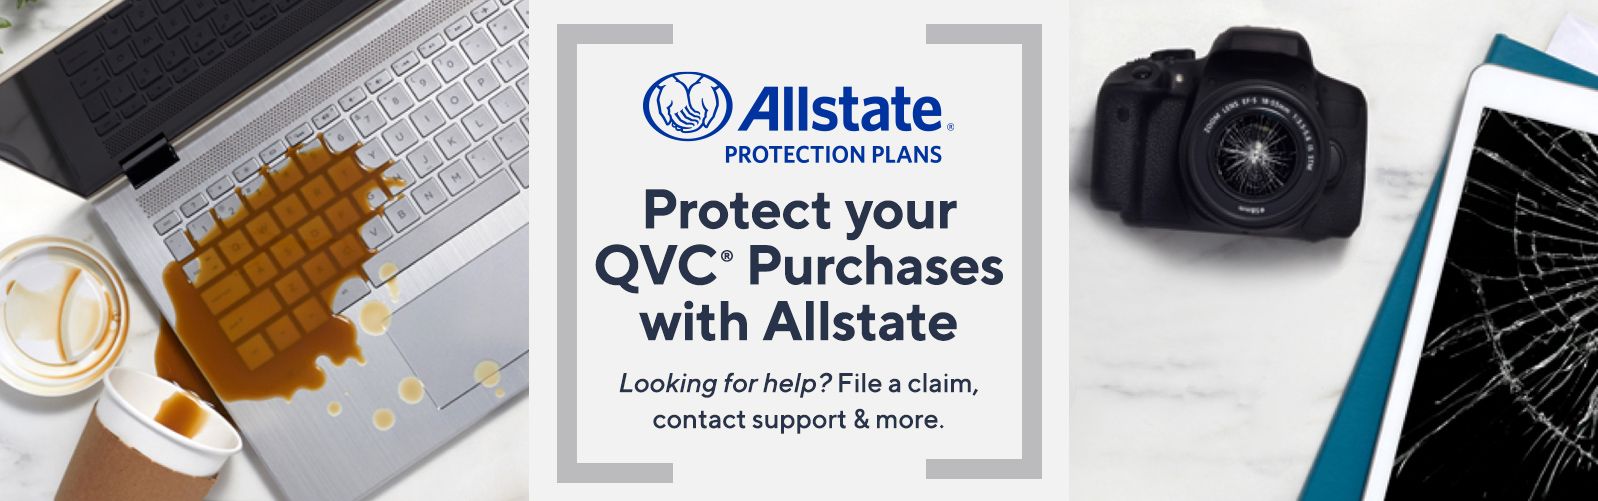 Allstate Protection Plans.  Protect your QVC® Purchases with Allstate.  Looking for help? File a claim, contact customer support & more.